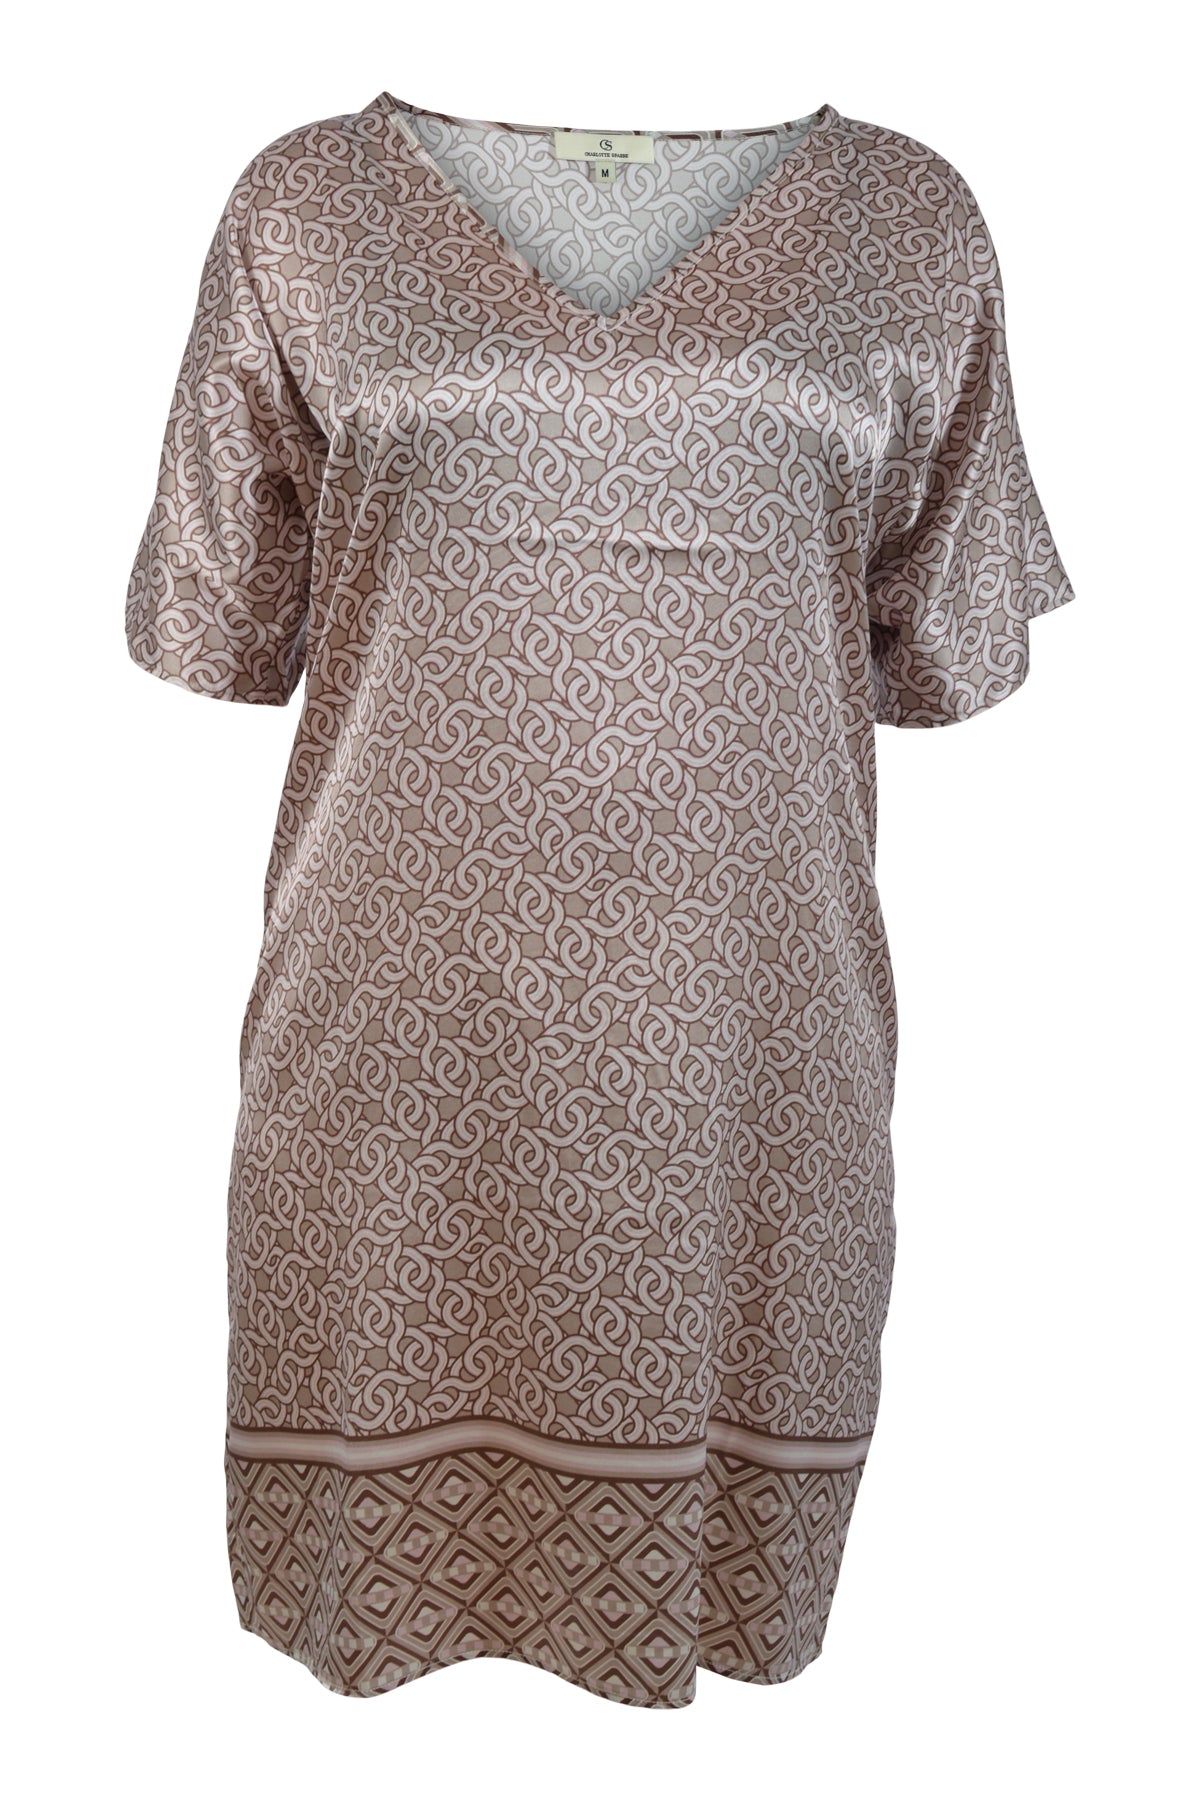 Charlotte Sparre Superdress 2951, Chainy Taupe